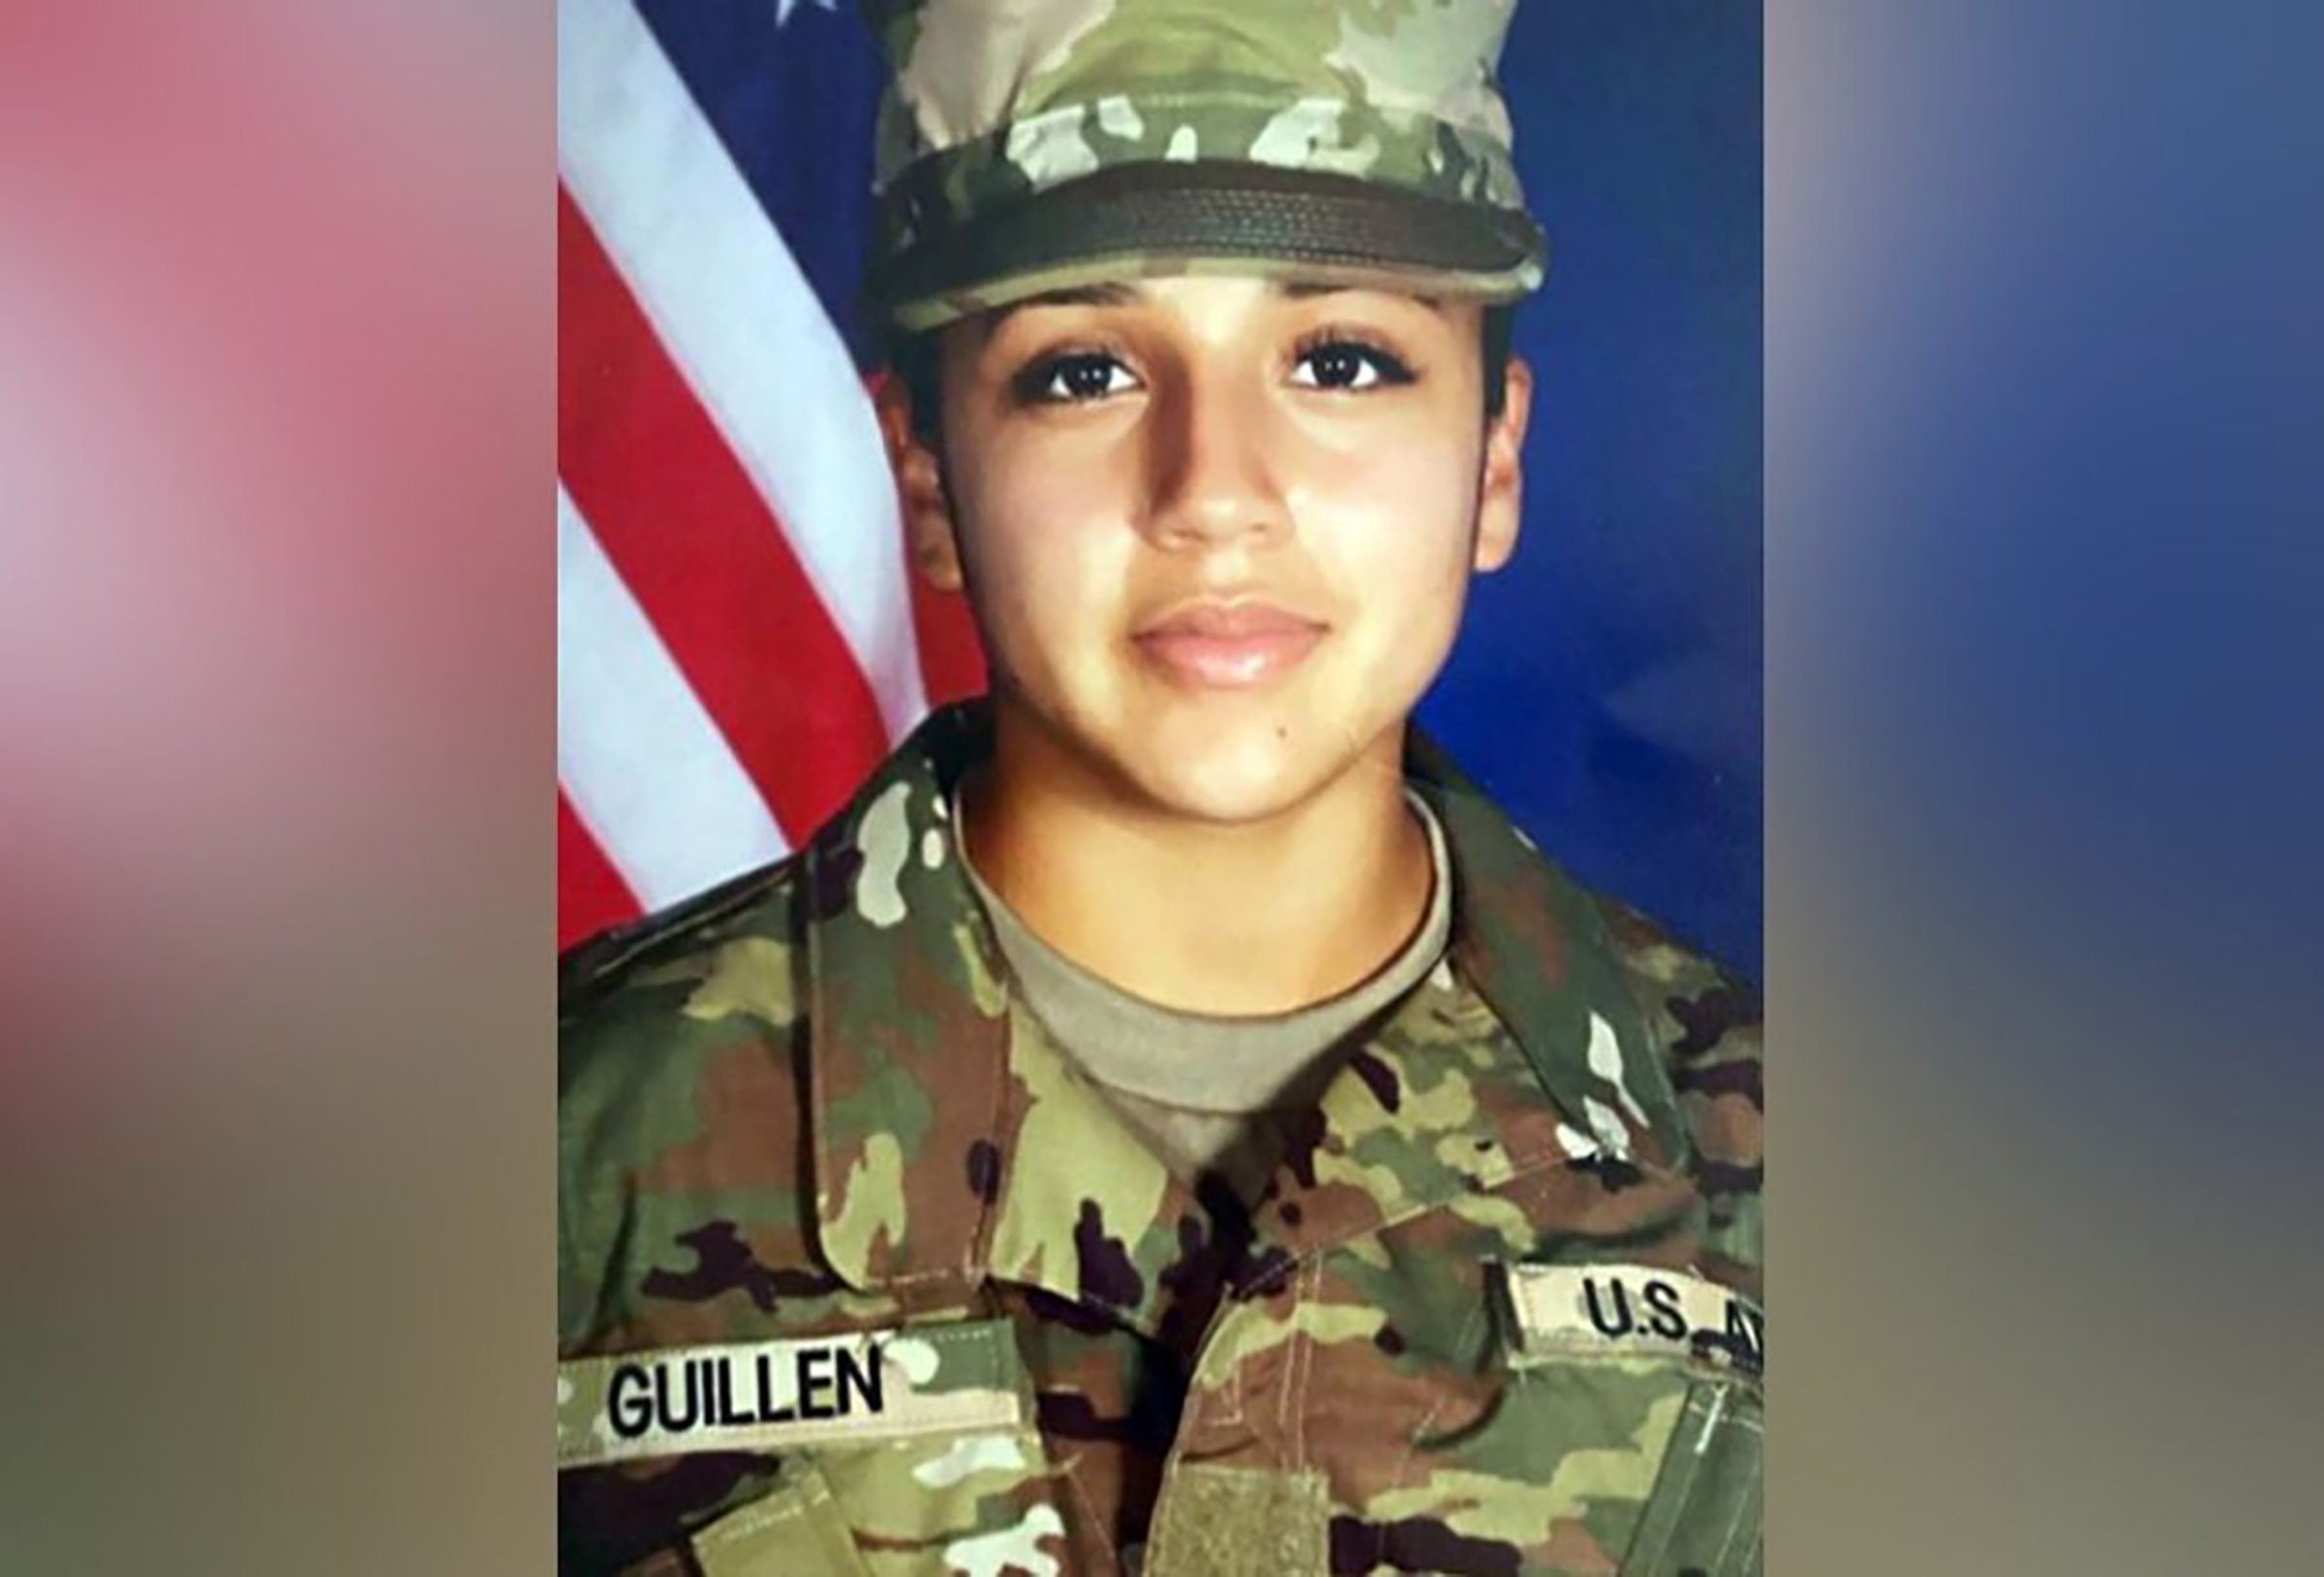 Army Pfc. Vanessa Guillen, 20, has been missing from her unit since April 22, 2020, according to the U.S. Army Criminal Investigation Command.